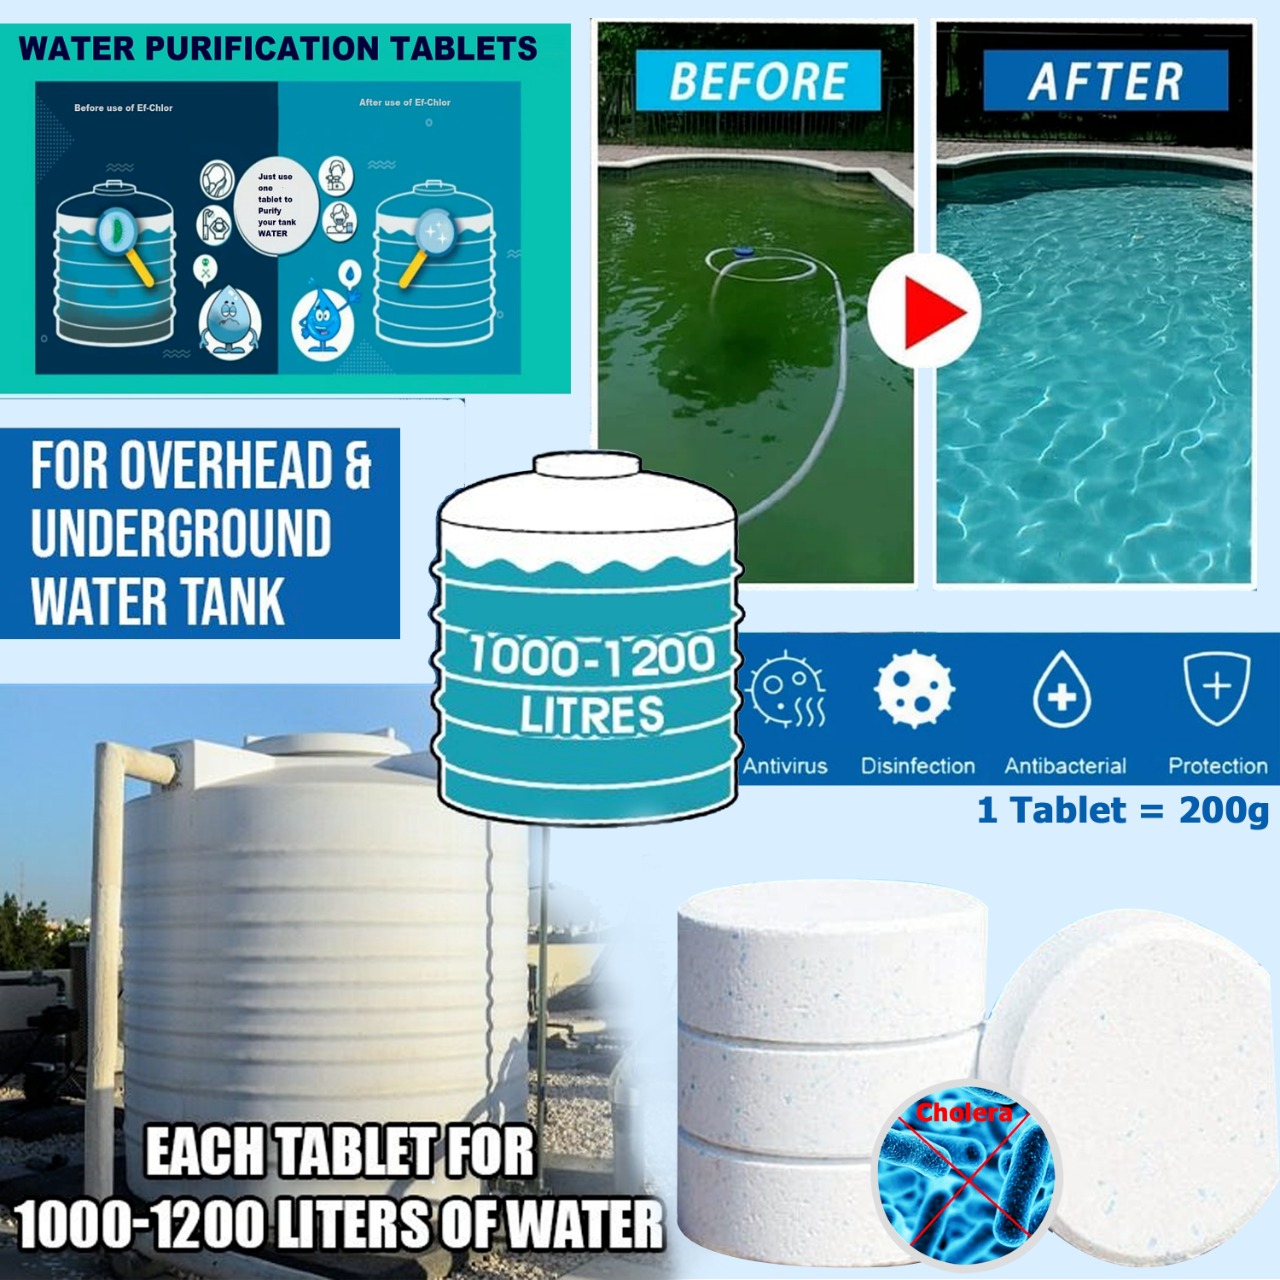 Chlorine tablets for disinfecting water tanks and swimming pools